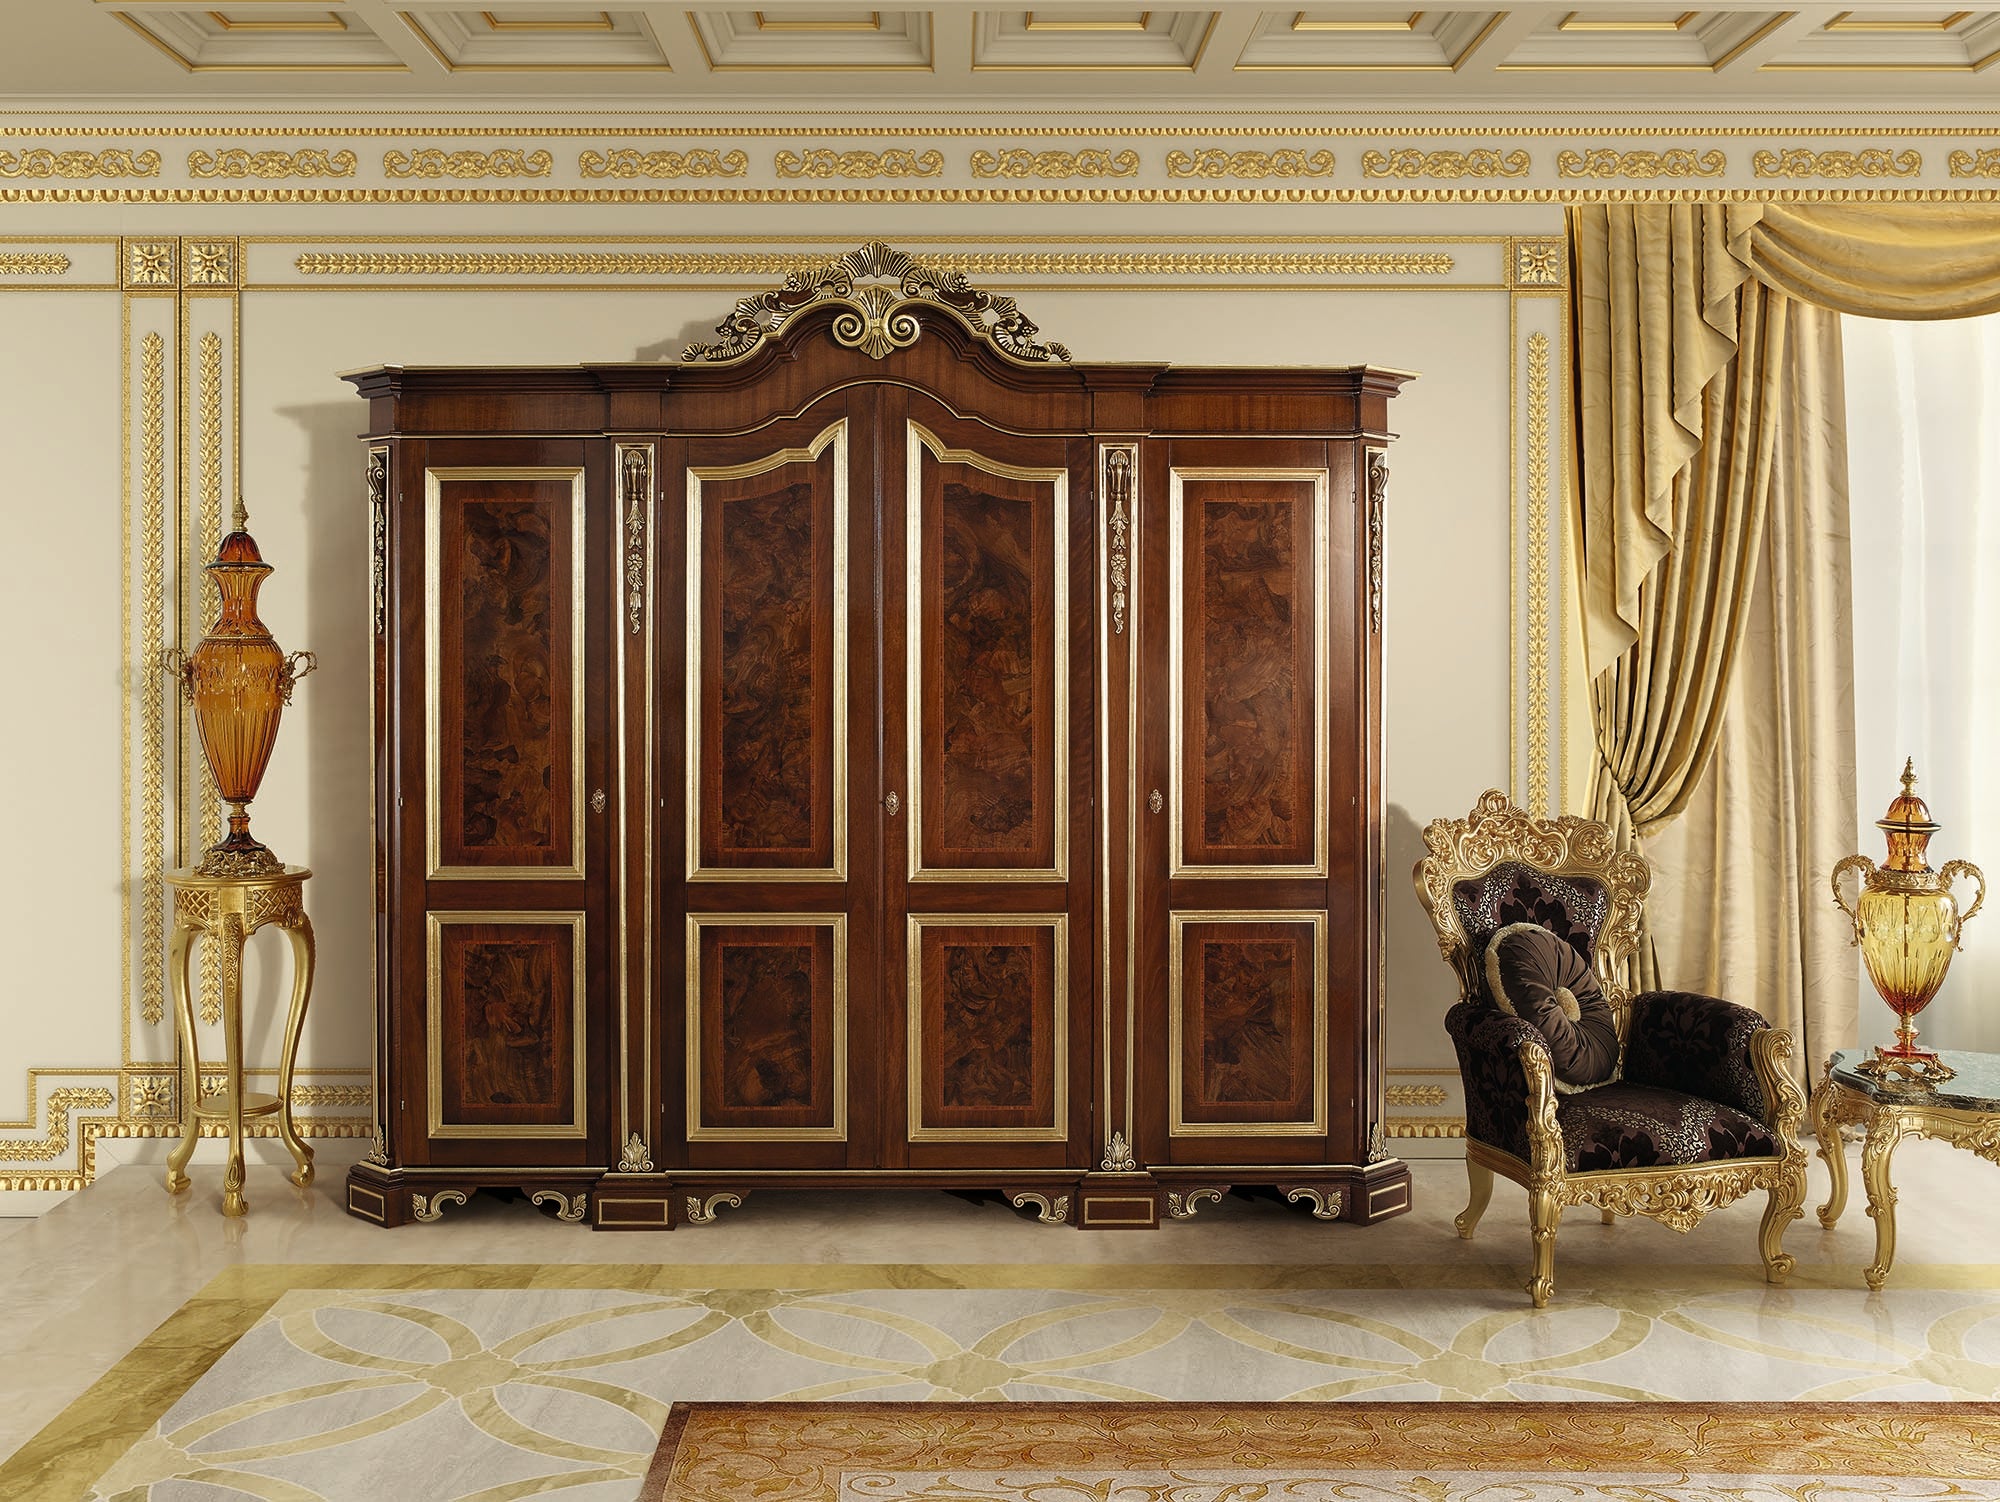 The Charm of Wood Briar Furniture in Classic Interiors